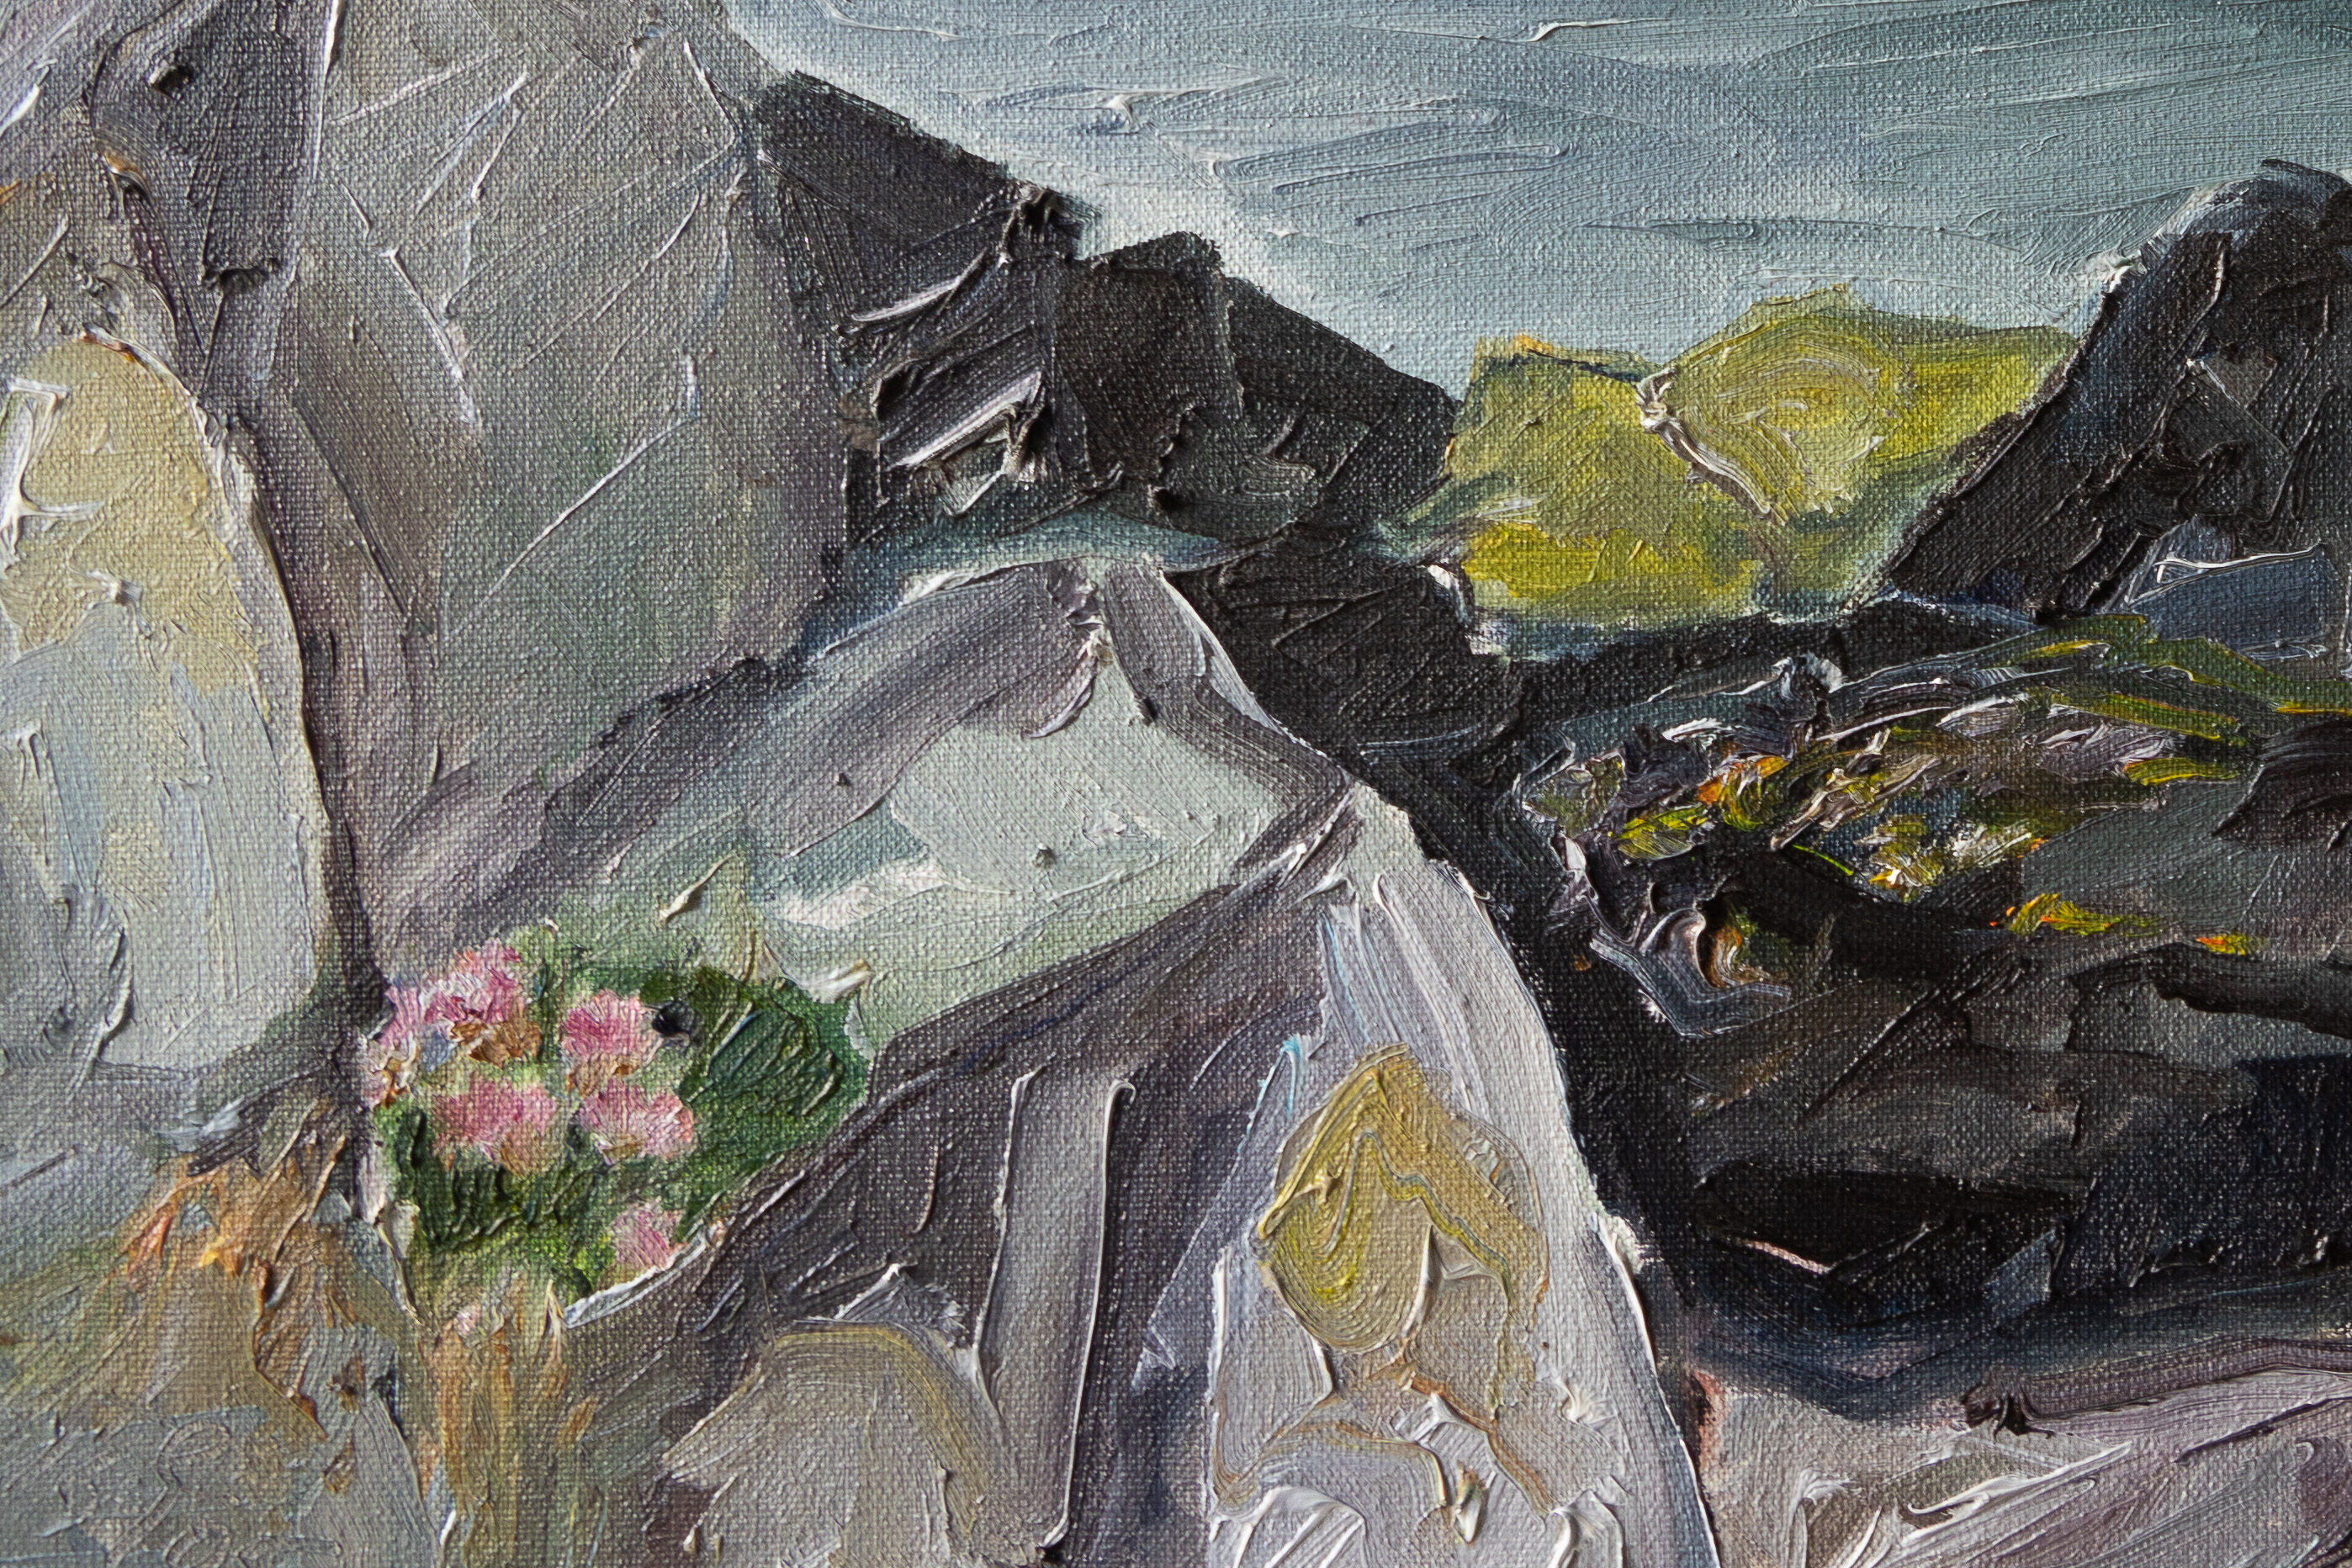 Picture "View of Torvalds Head/ Shetland" (2005)